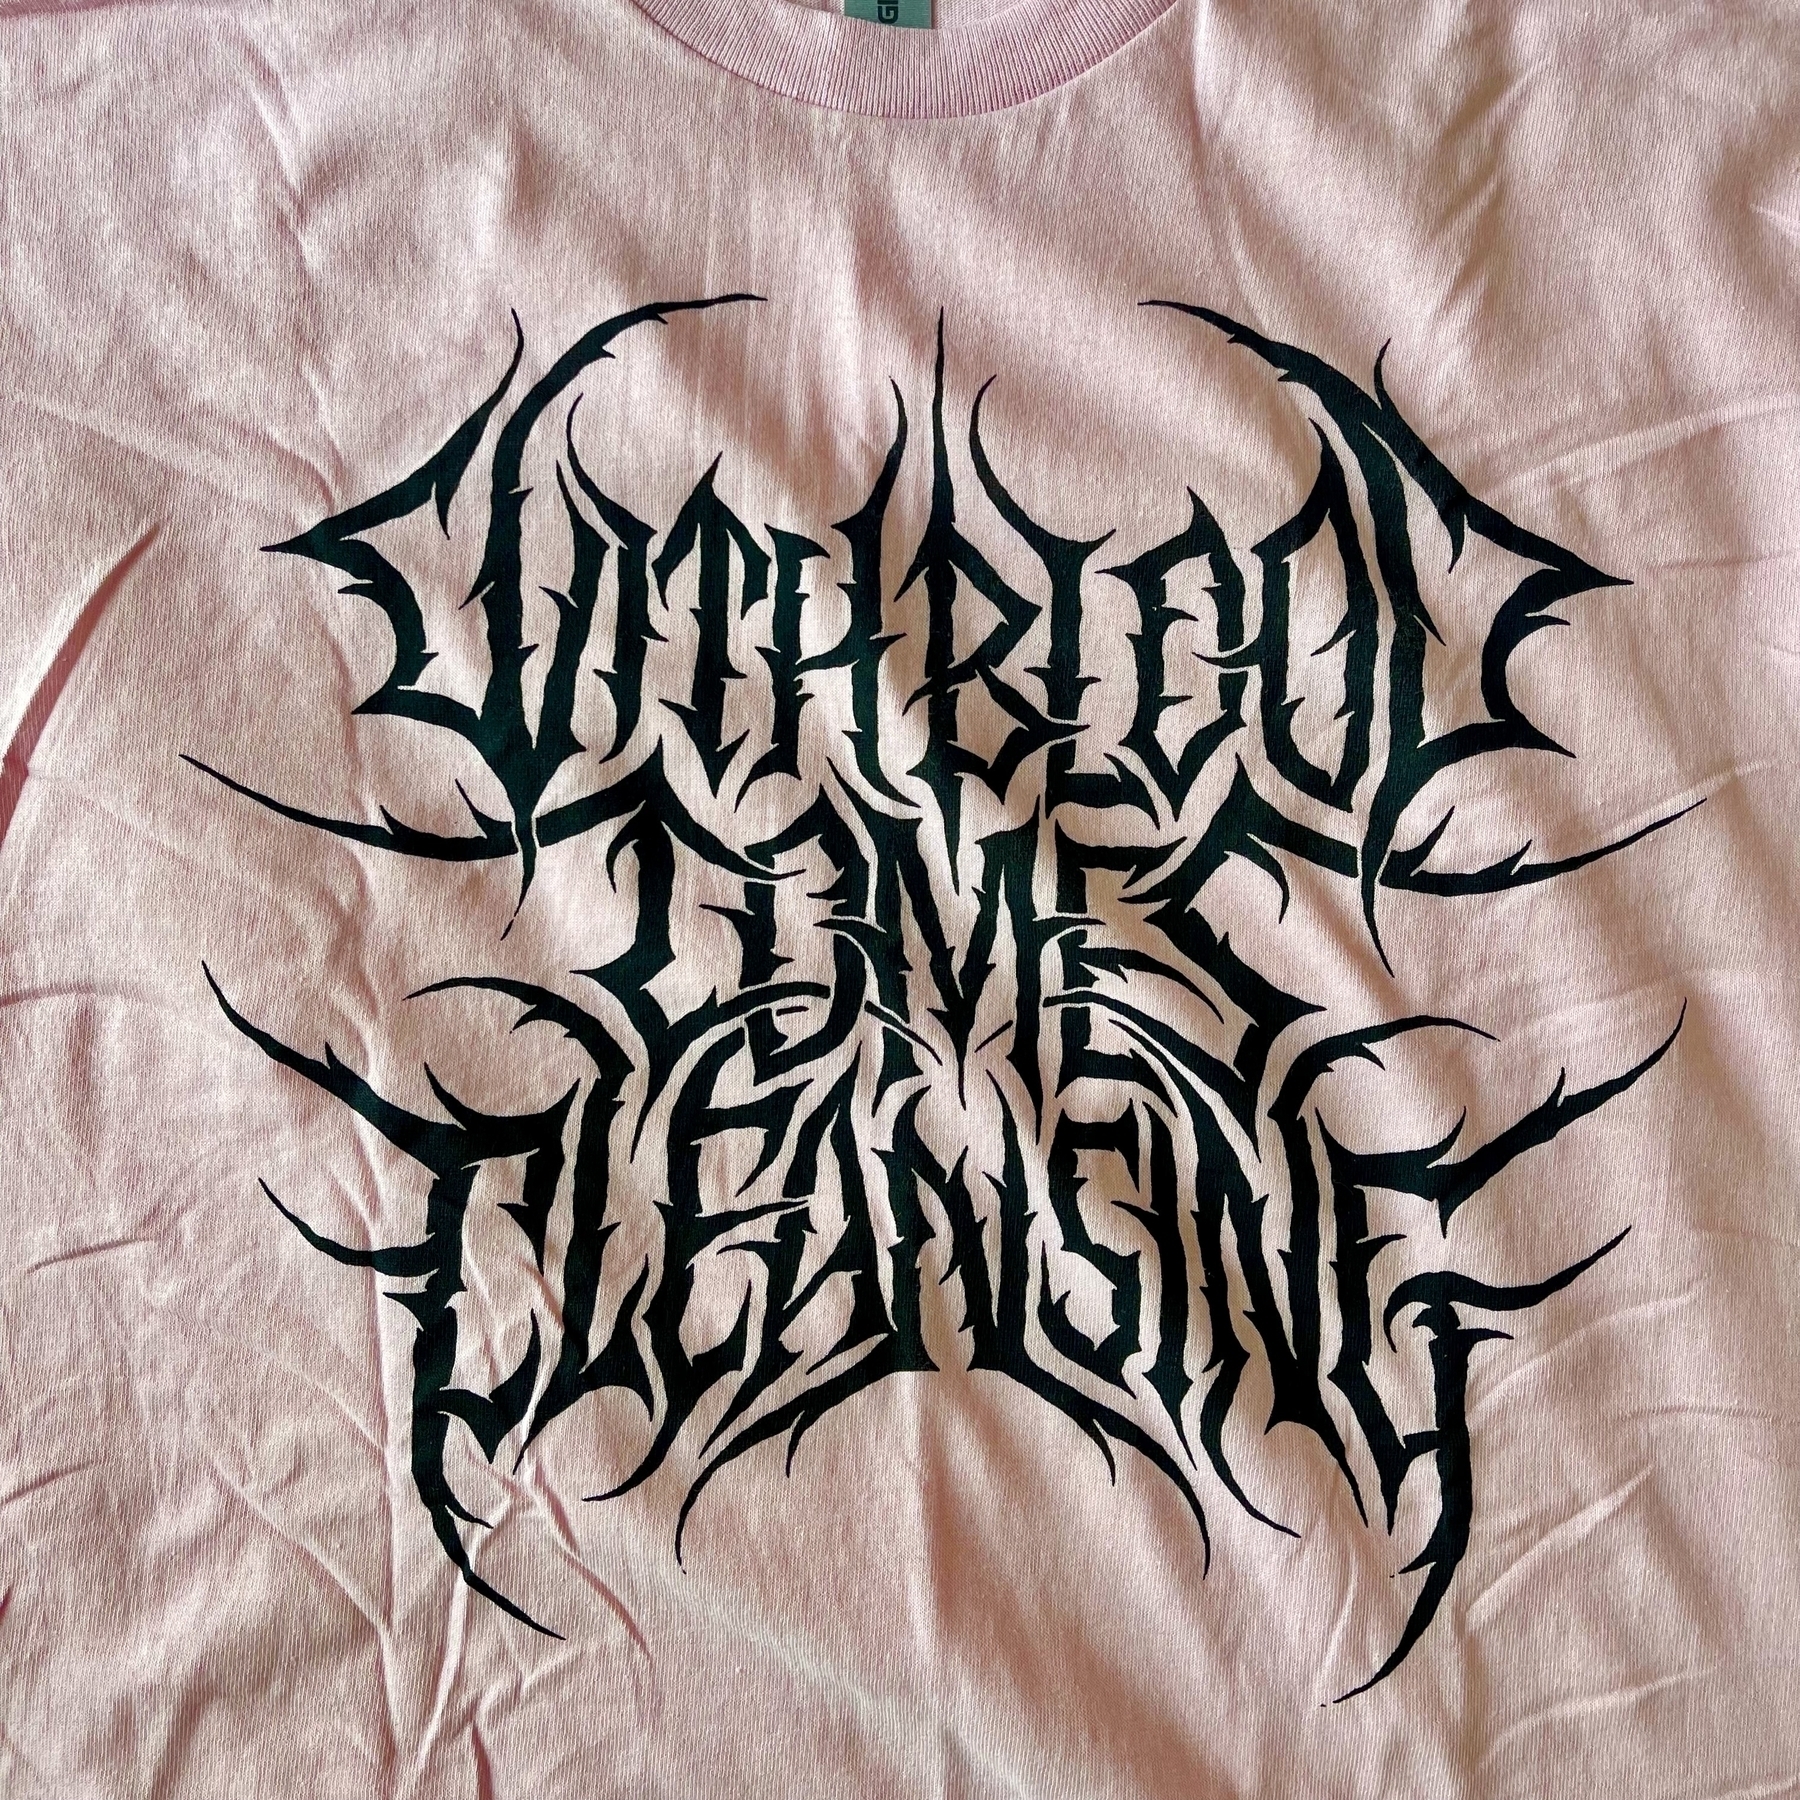 A pink shirt with “metal letters”